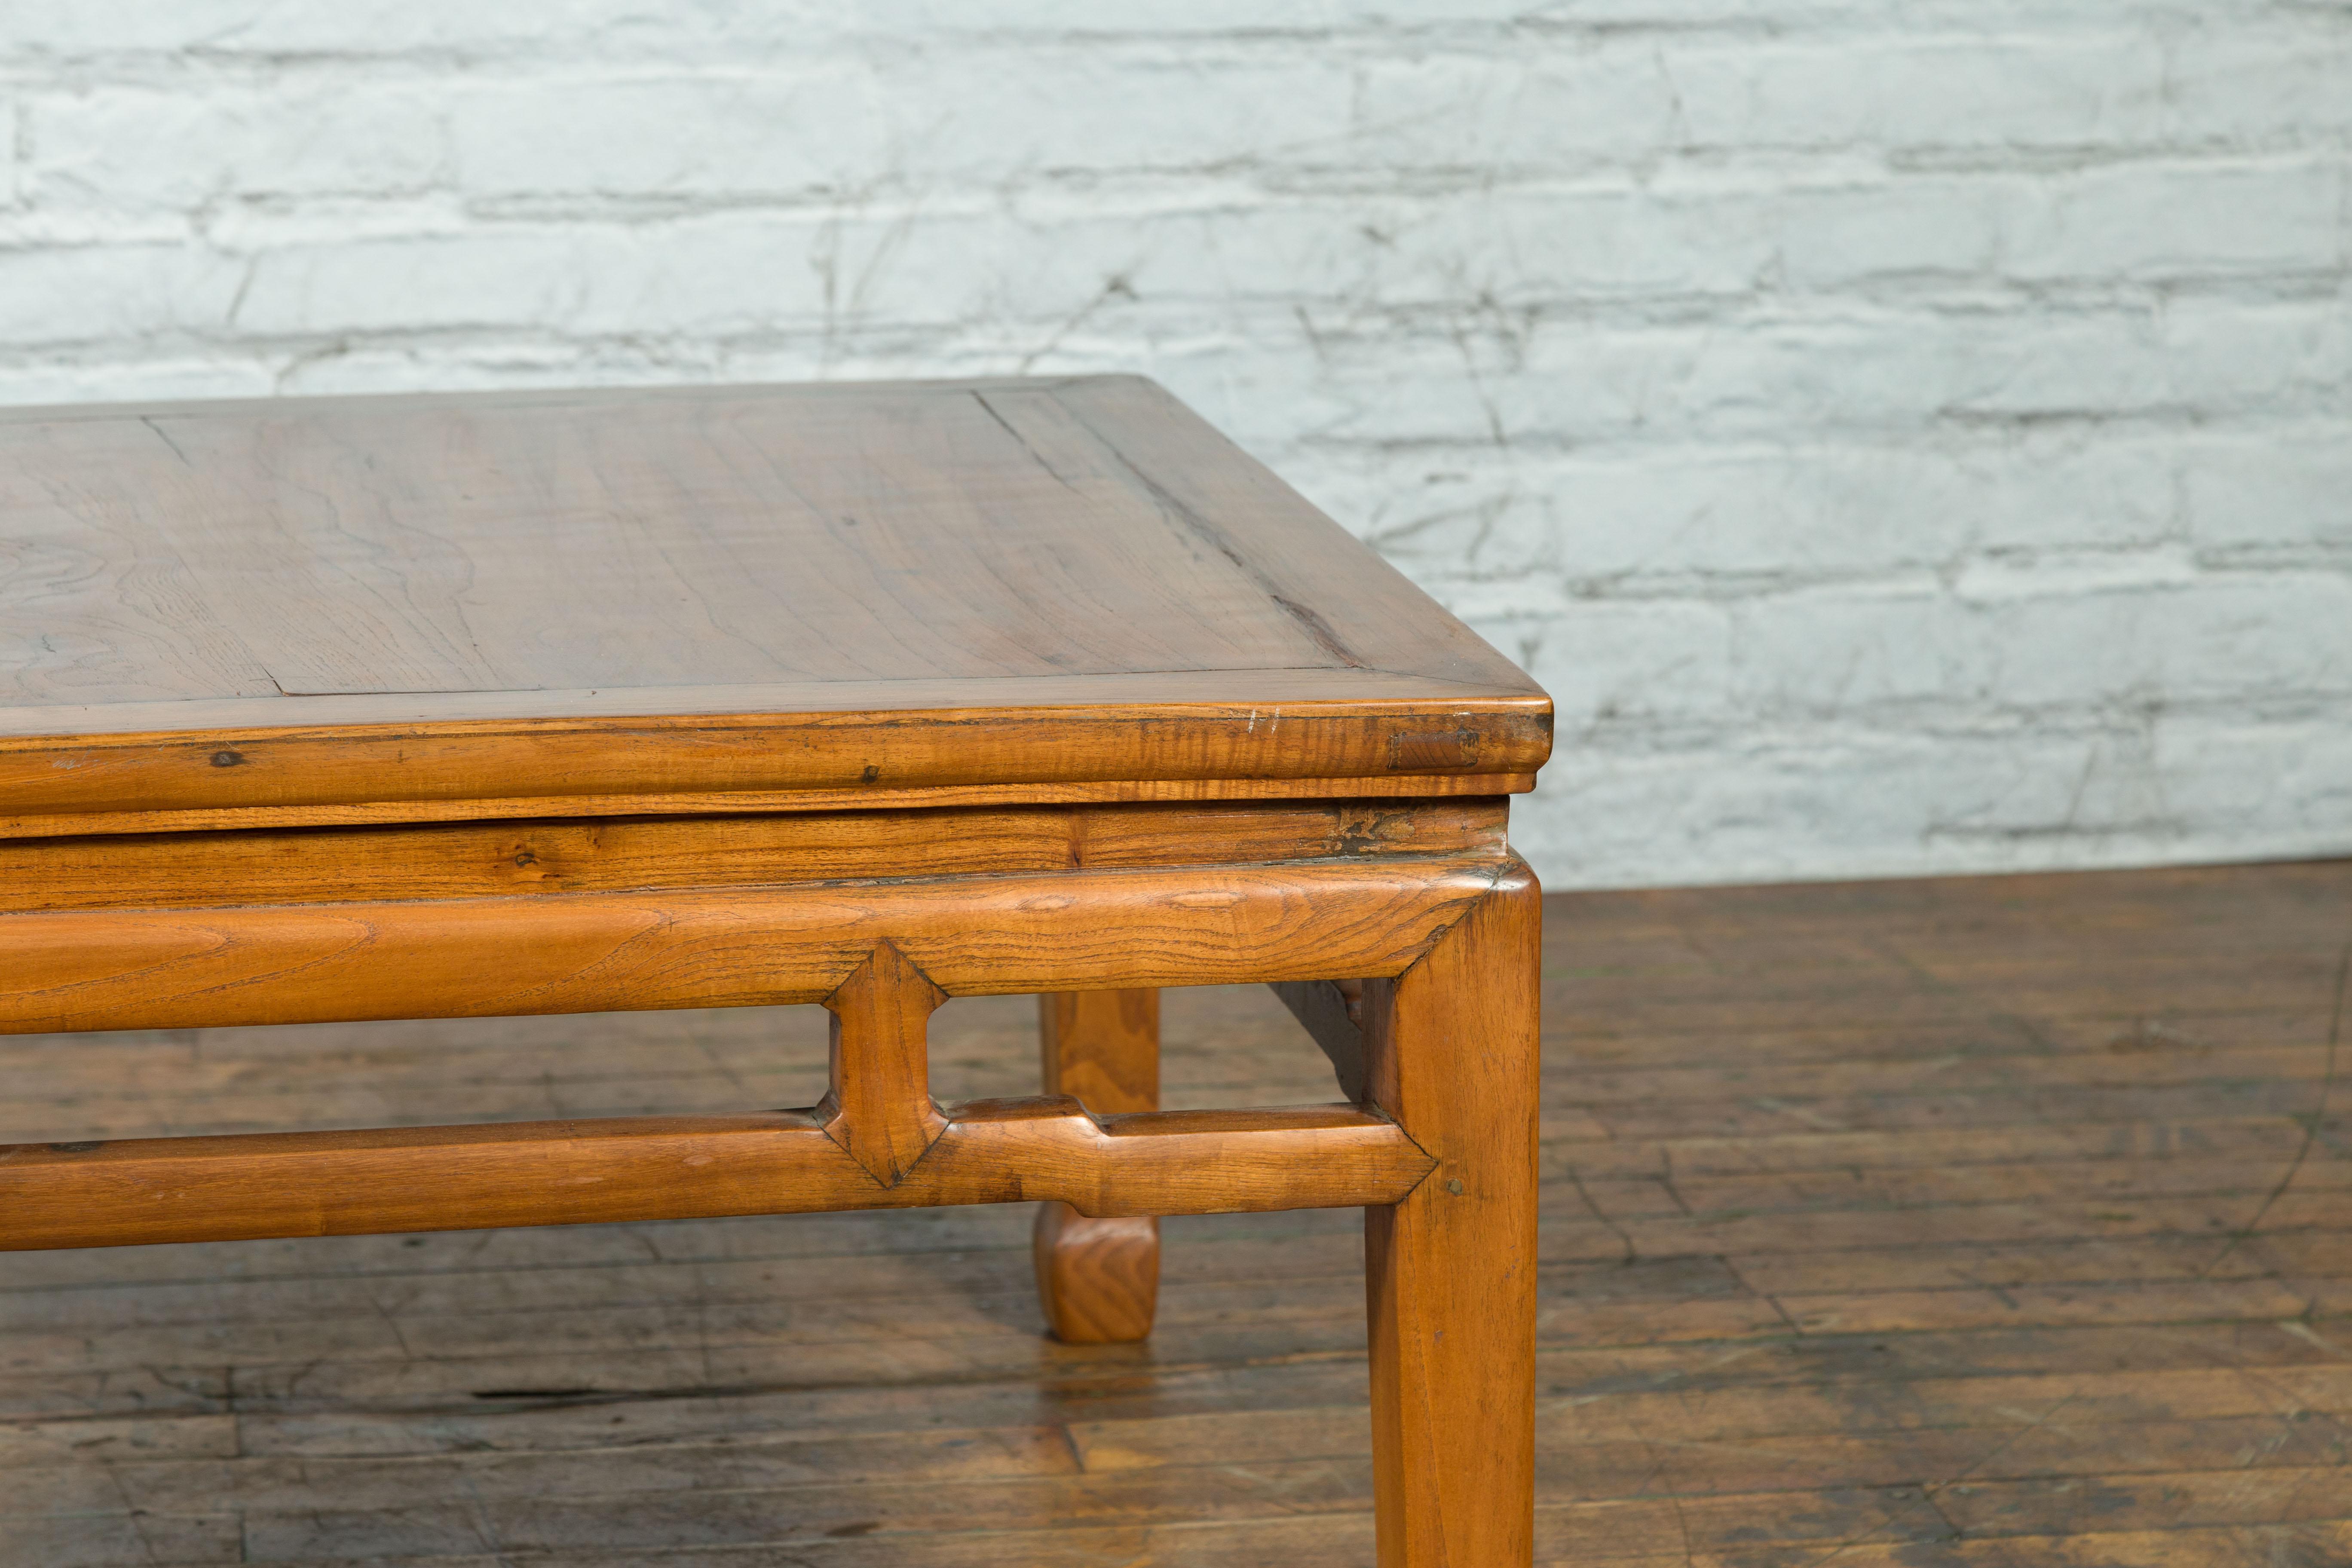 19th Century Chinese Qing Dynasty Low Table with Humpback Stretcher and Horse Hoof Feet